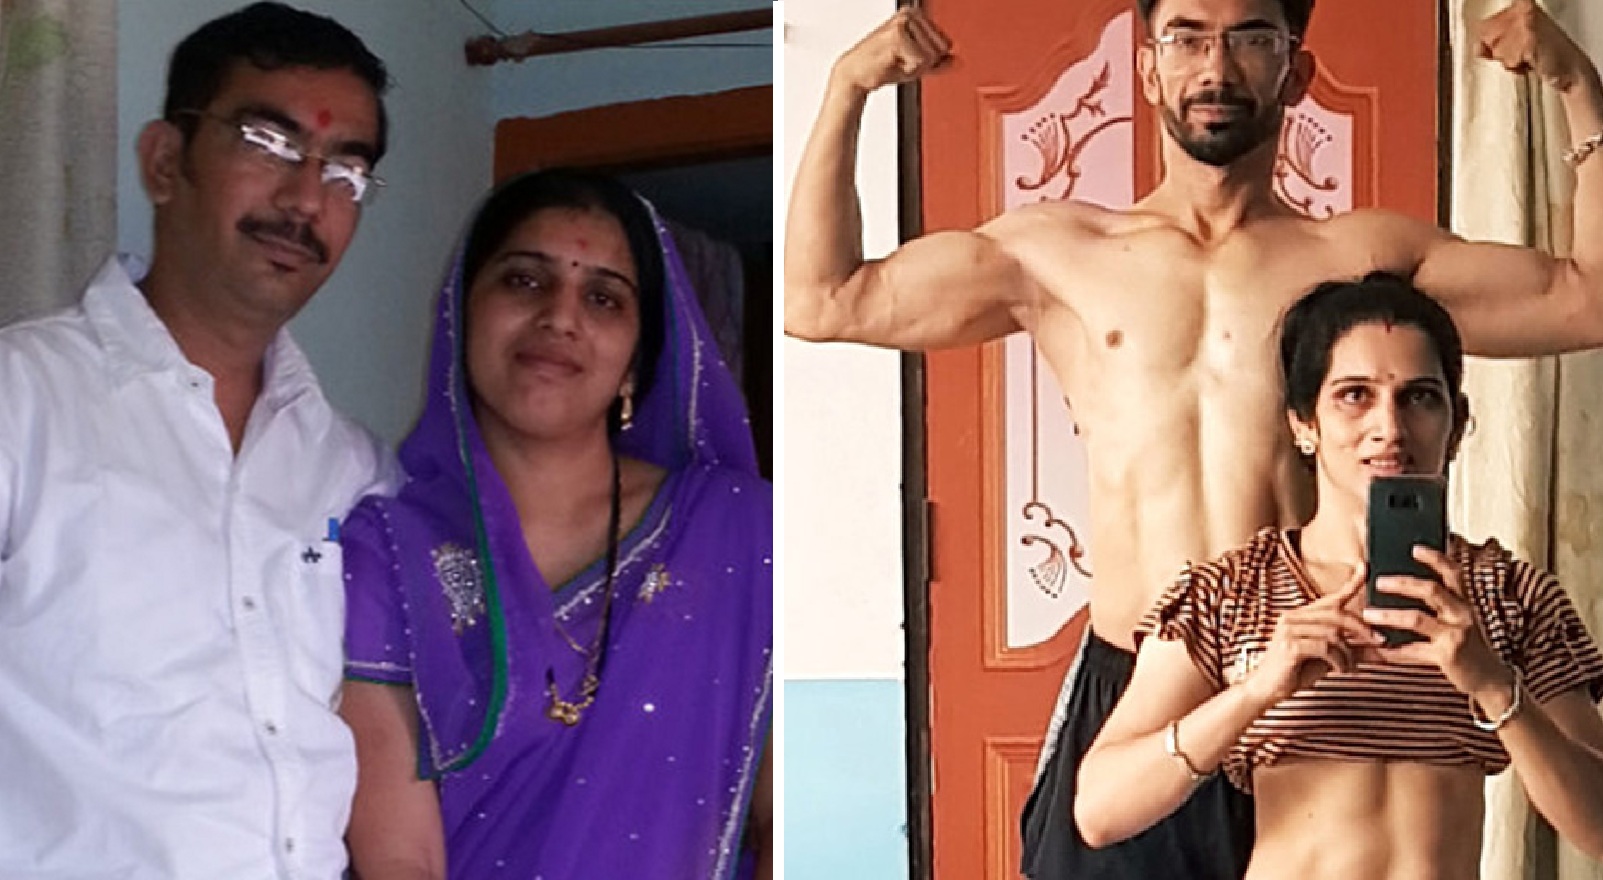 From ‘Flab’ to ‘Fit’: This Indian Couple’s Epic Transformation Is Taking Over Internet